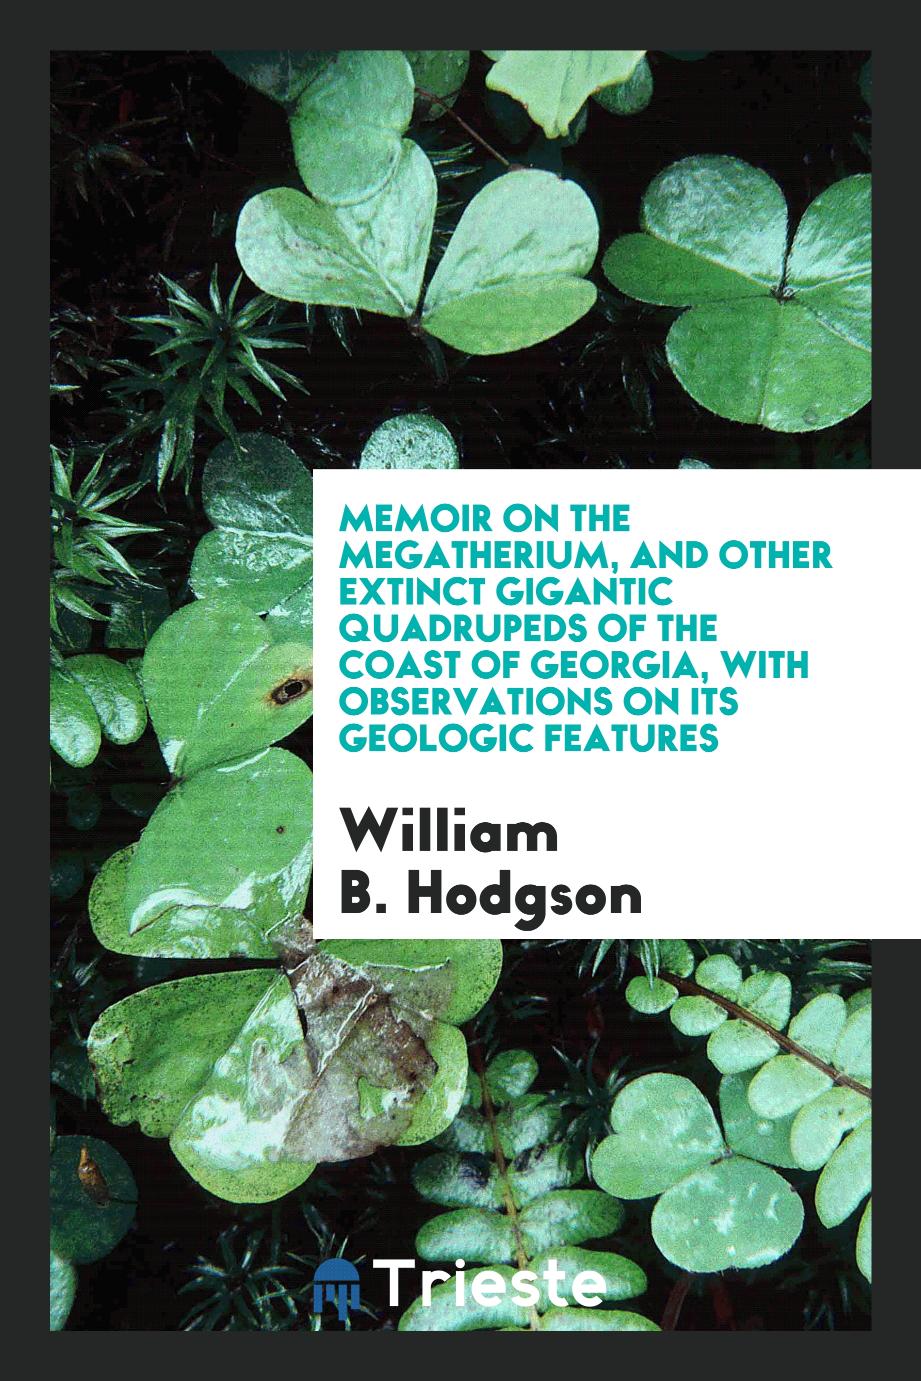 Memoir on the Megatherium, and other extinct gigantic quadrupeds of the coast of Georgia, with observations on its geologic features